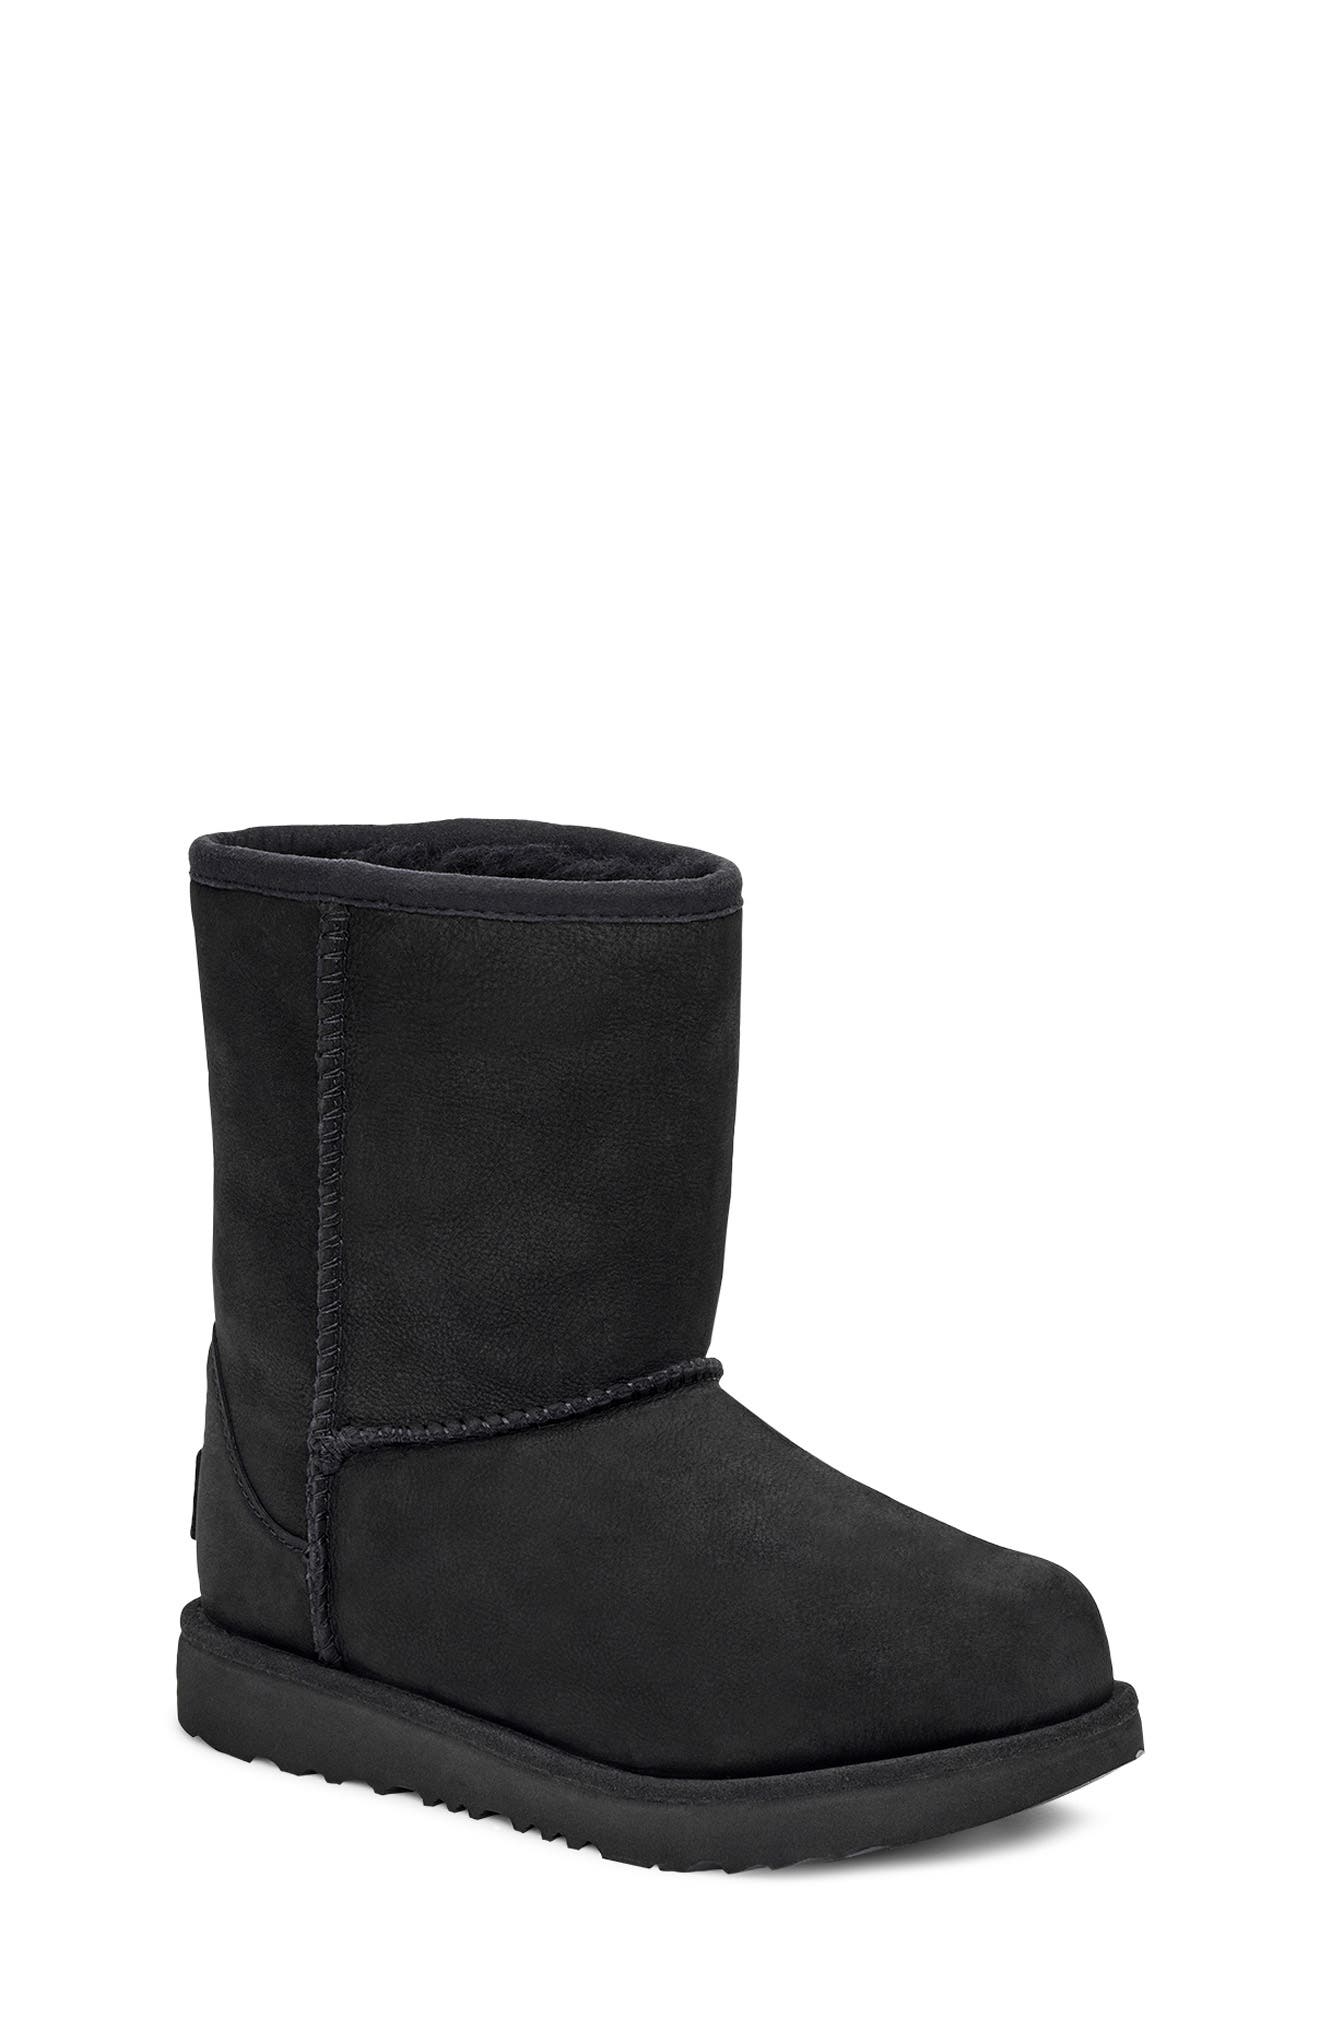 classic genuine shearling lined short waterproof boot